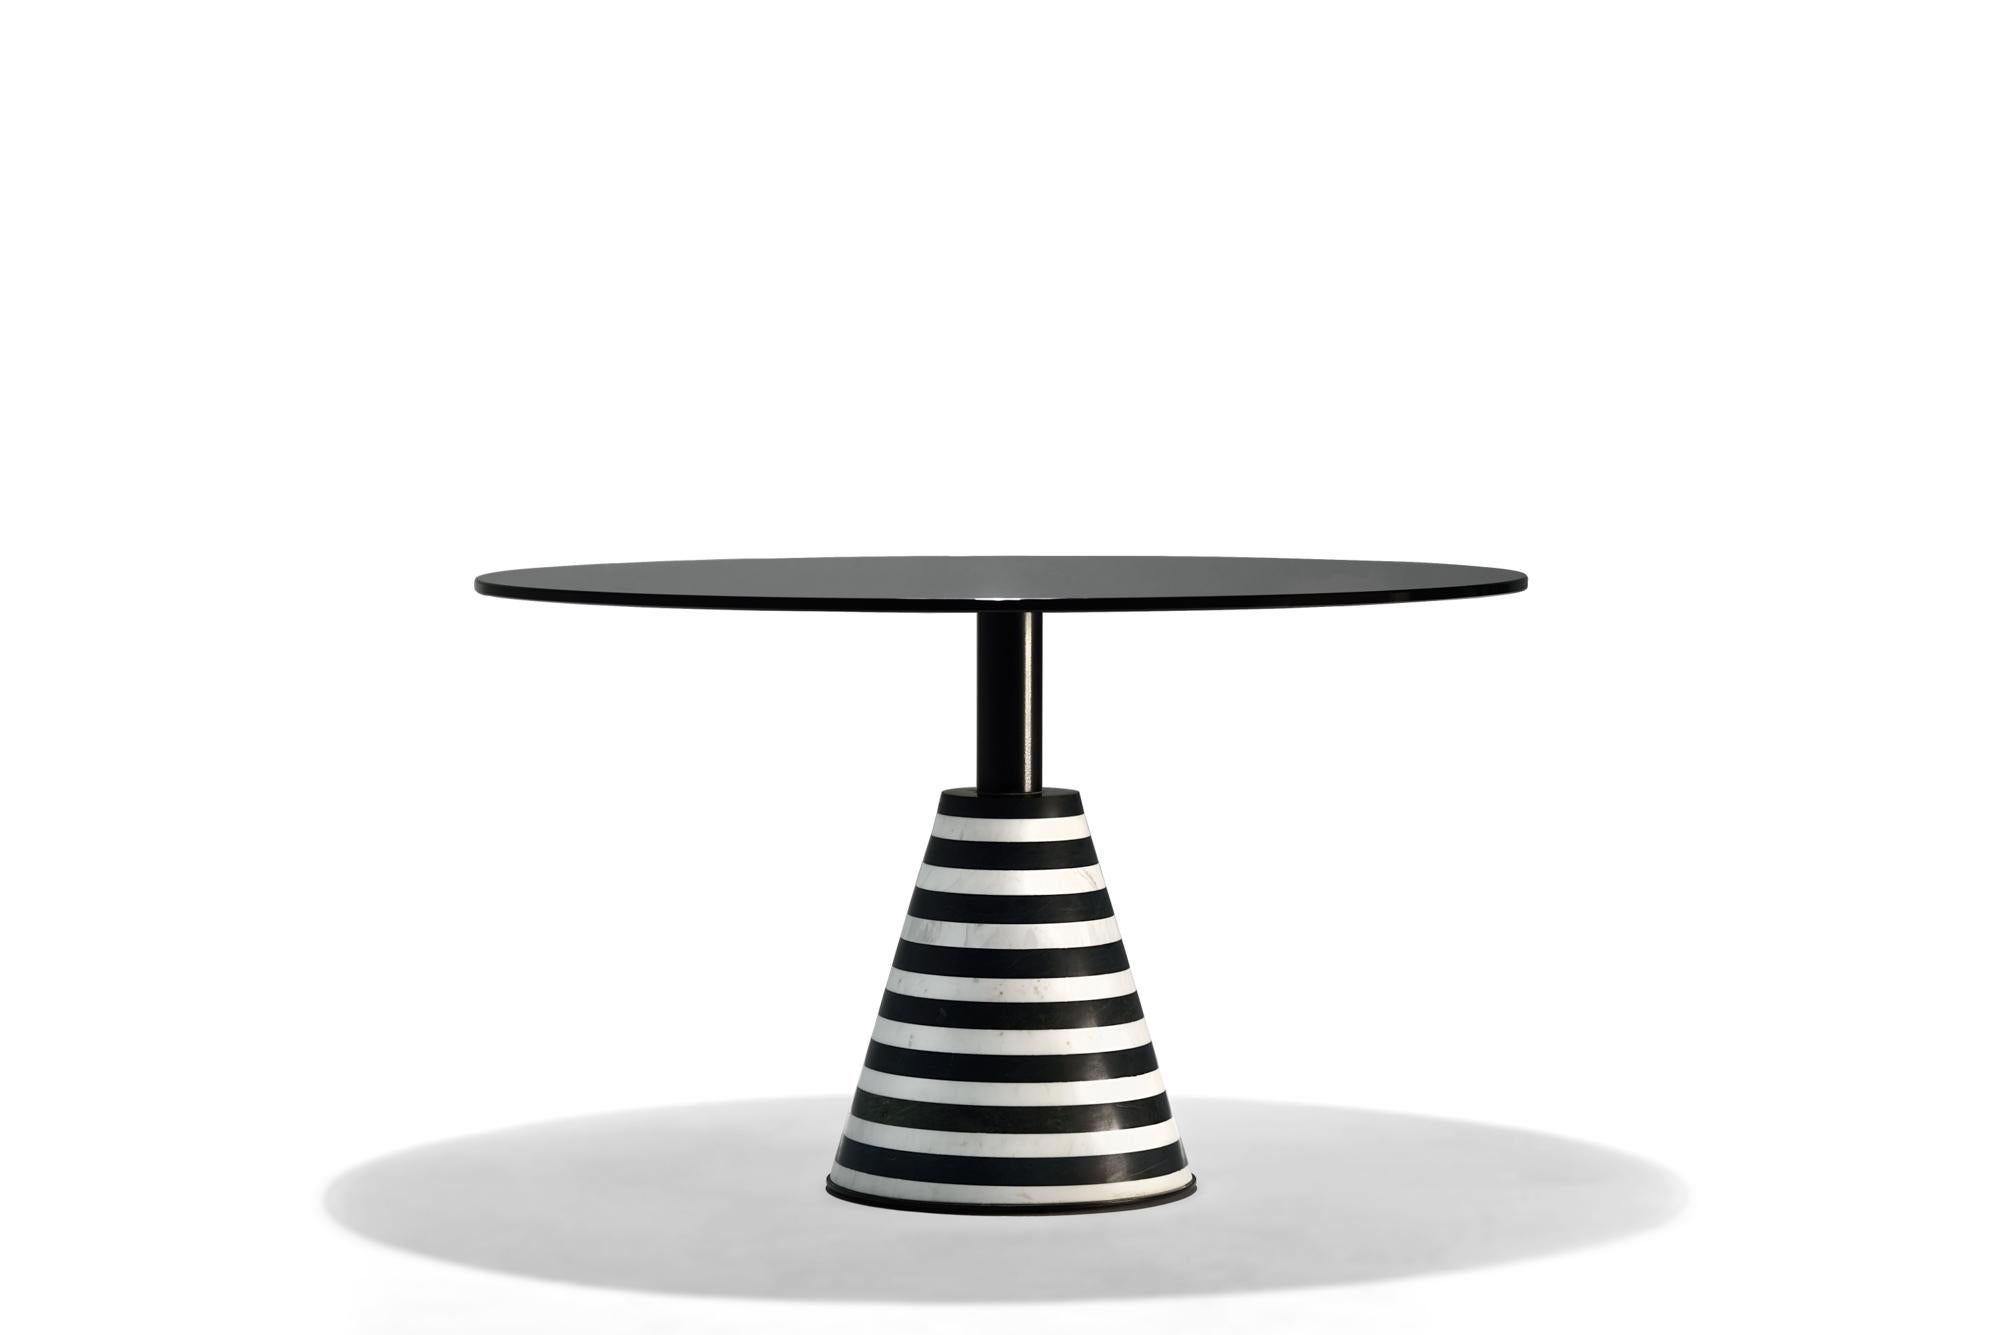 Beautifully round coffee tables showcase a black securit glass top based on a symmetrical striped black and white marble solid base. Crafted with a beautifully contemporary shape, can complement an array of interior design styles. Expertly hand